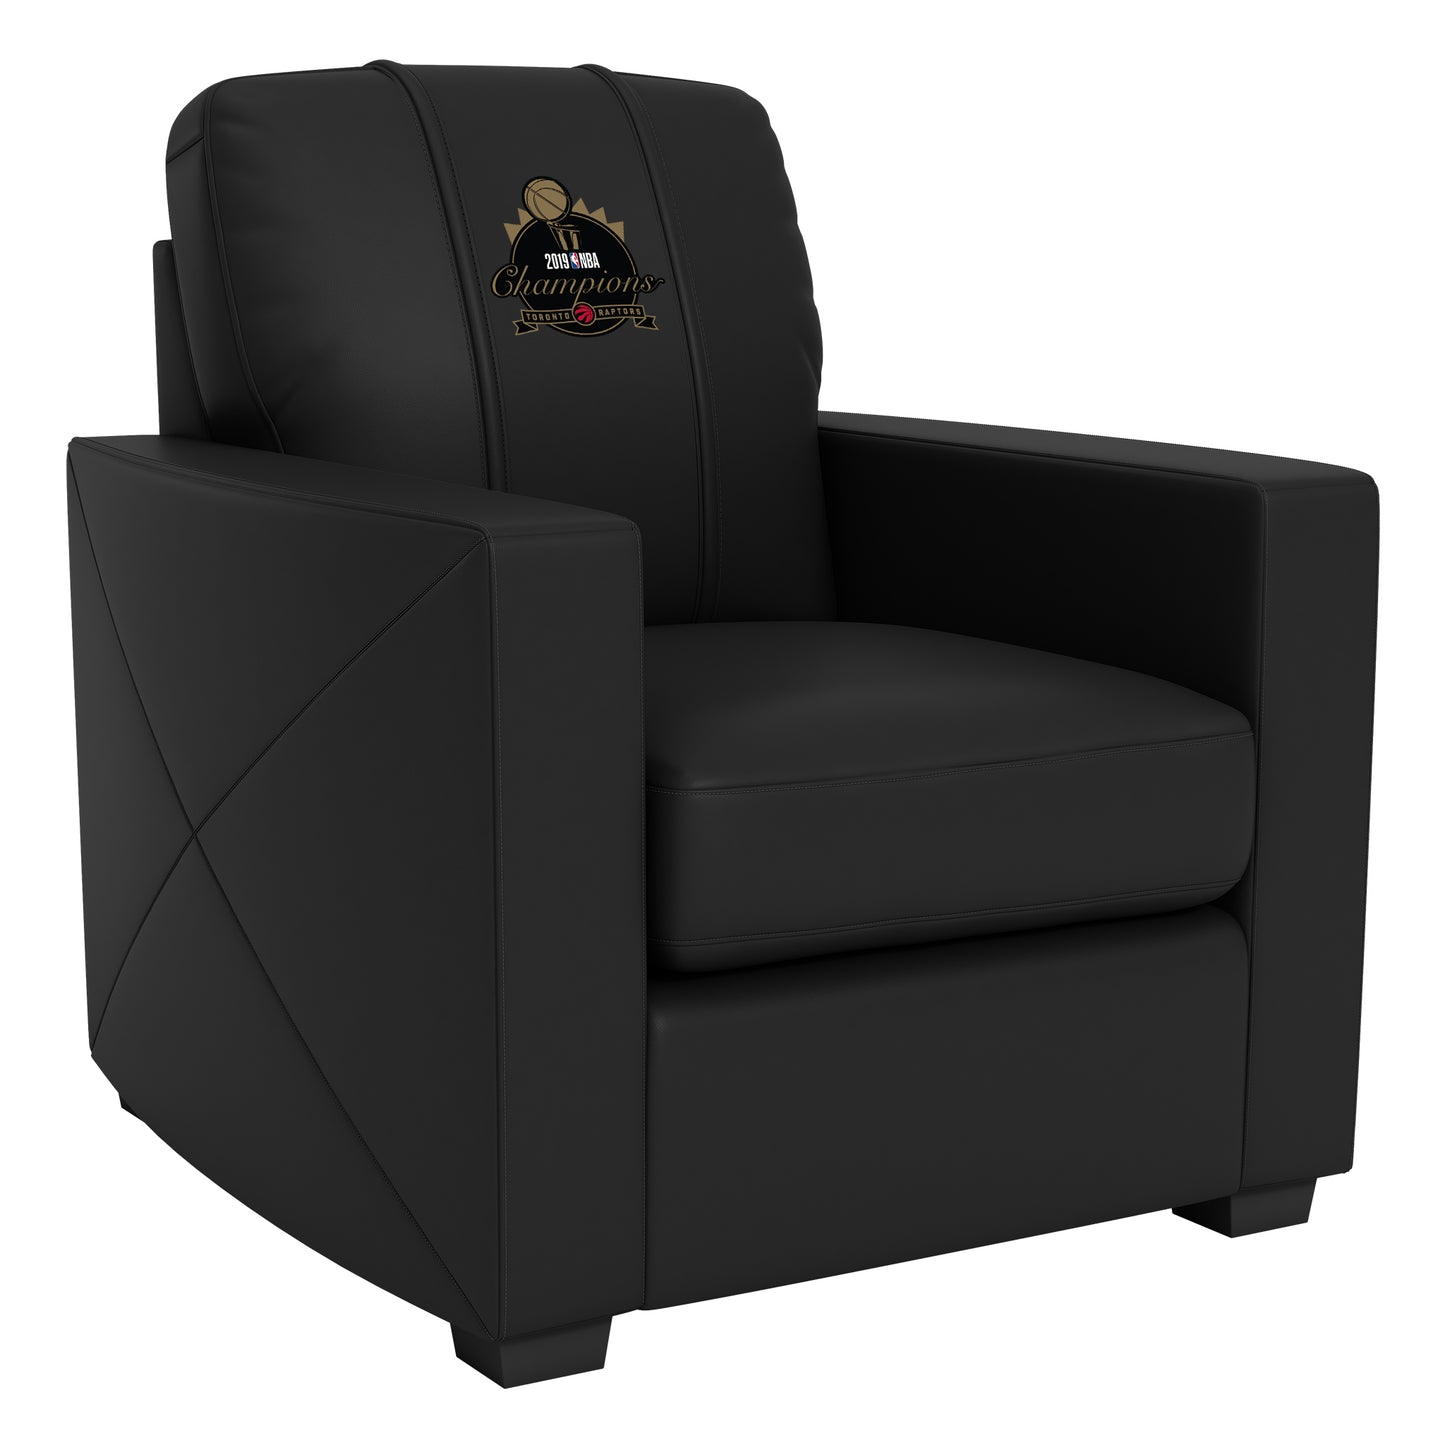 Silver Club Chair with Toronto Raptors Primary 2019 Champions Logo